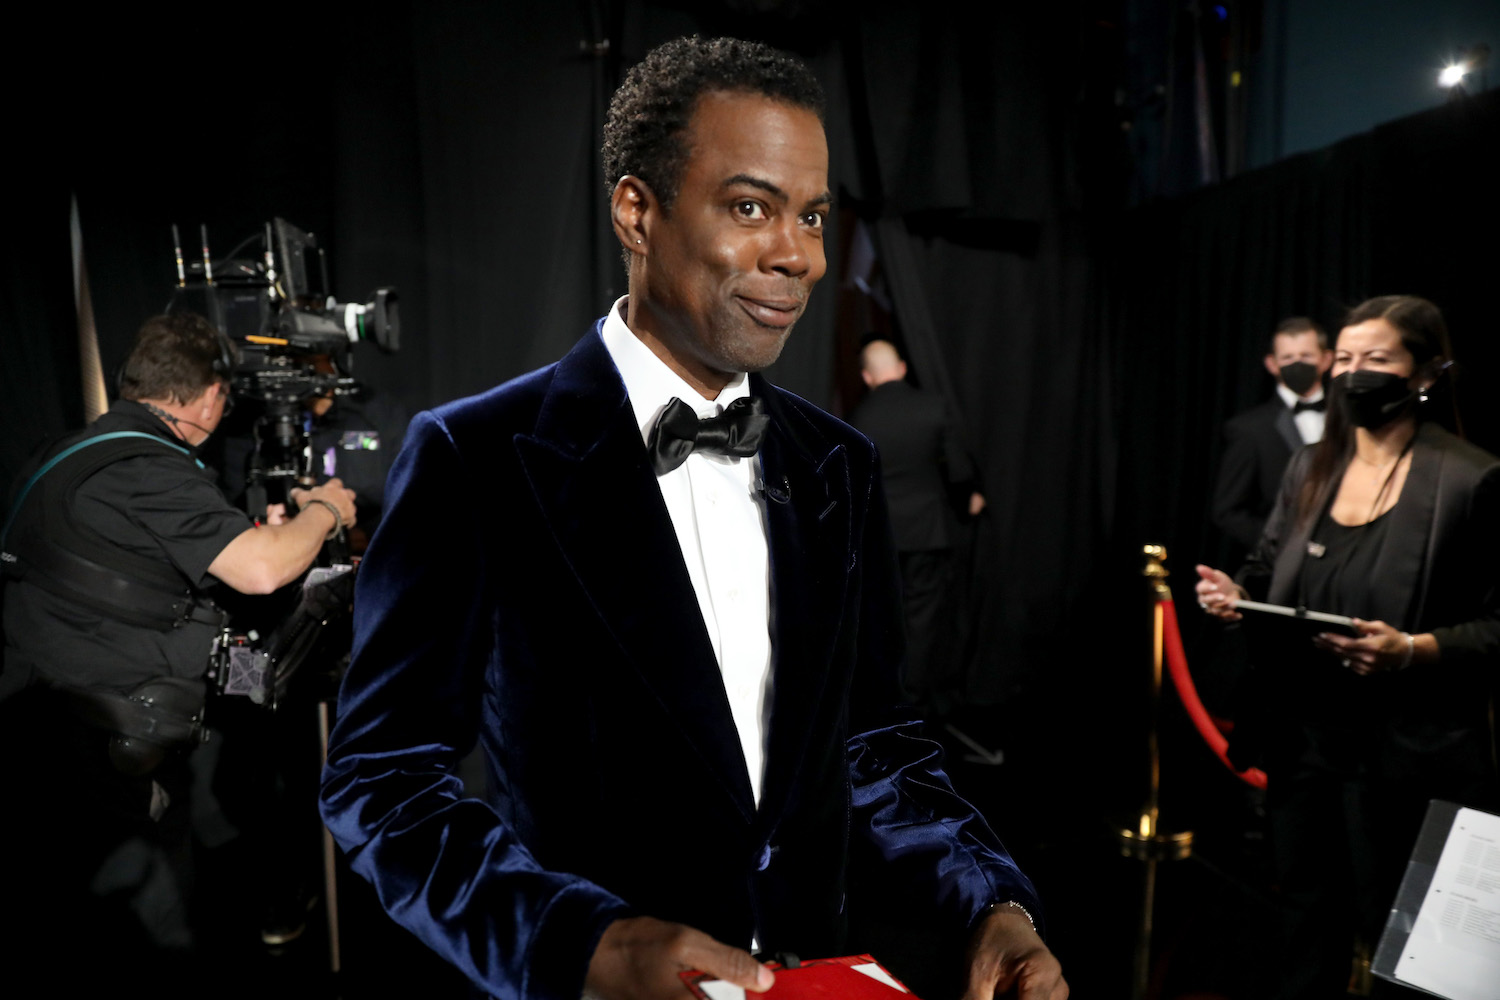 Chris Rock smiling in a suit at the Oscars 2022